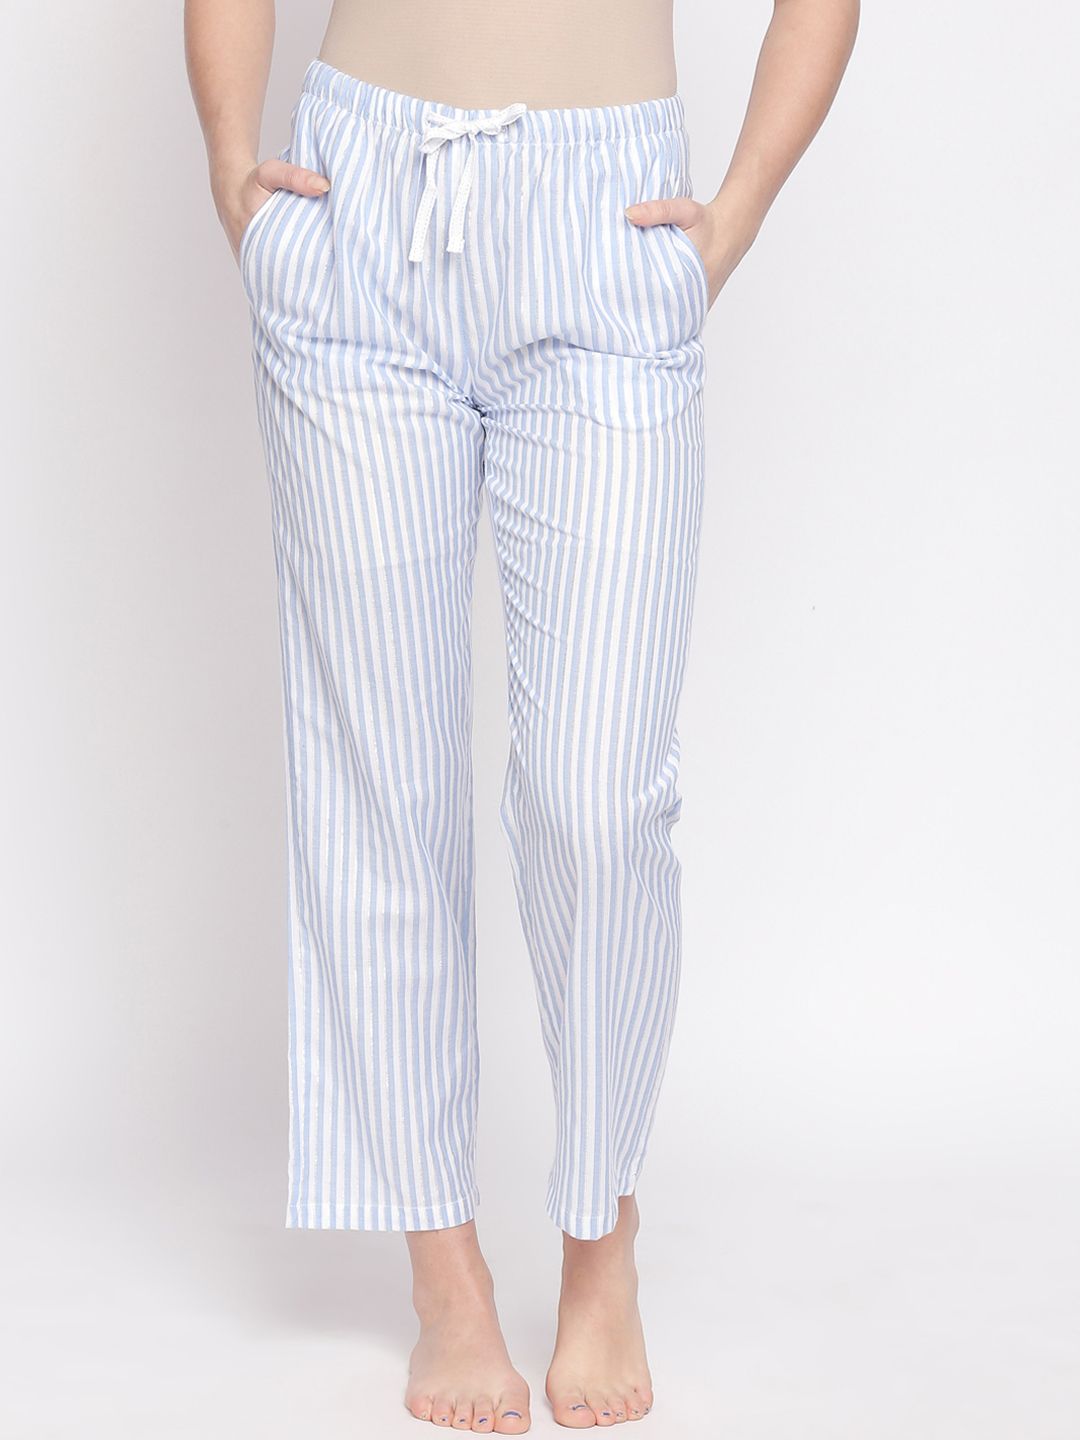 Dreamz by Pantaloons Women White & Blue Striped Lounge Pants Price in India